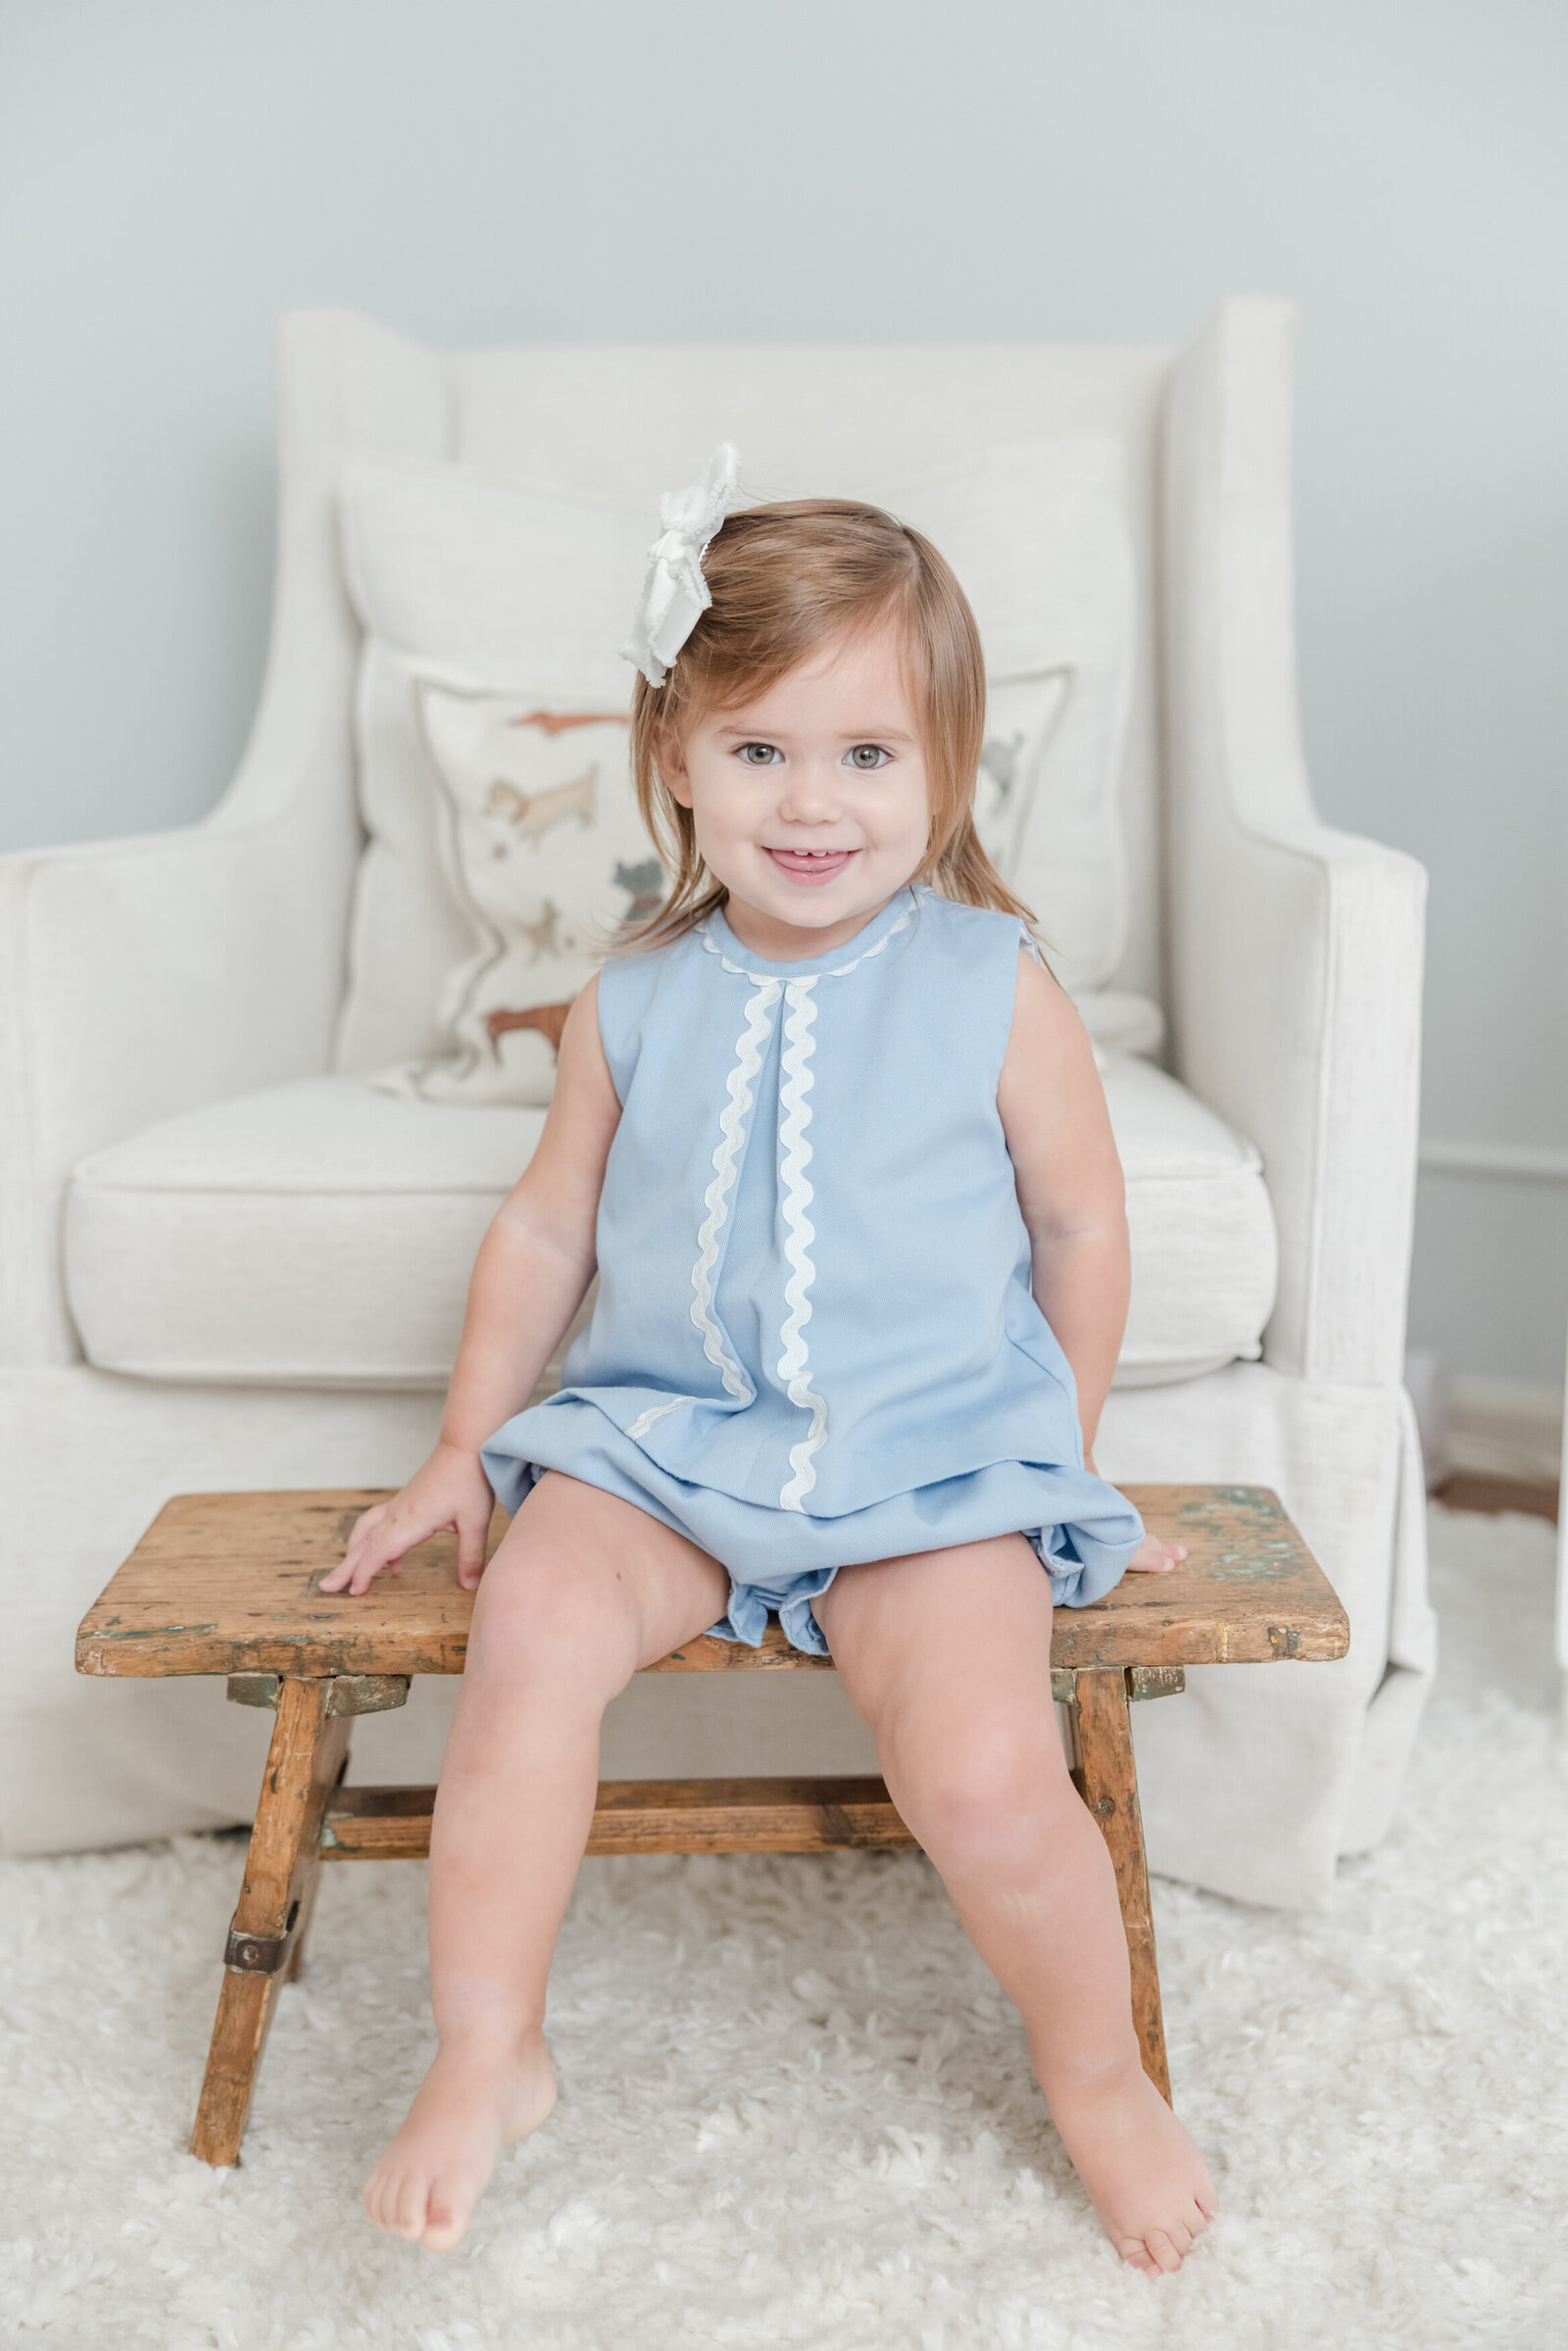 Portrait of a toddler girl sitting on a wooden stool and smiling.